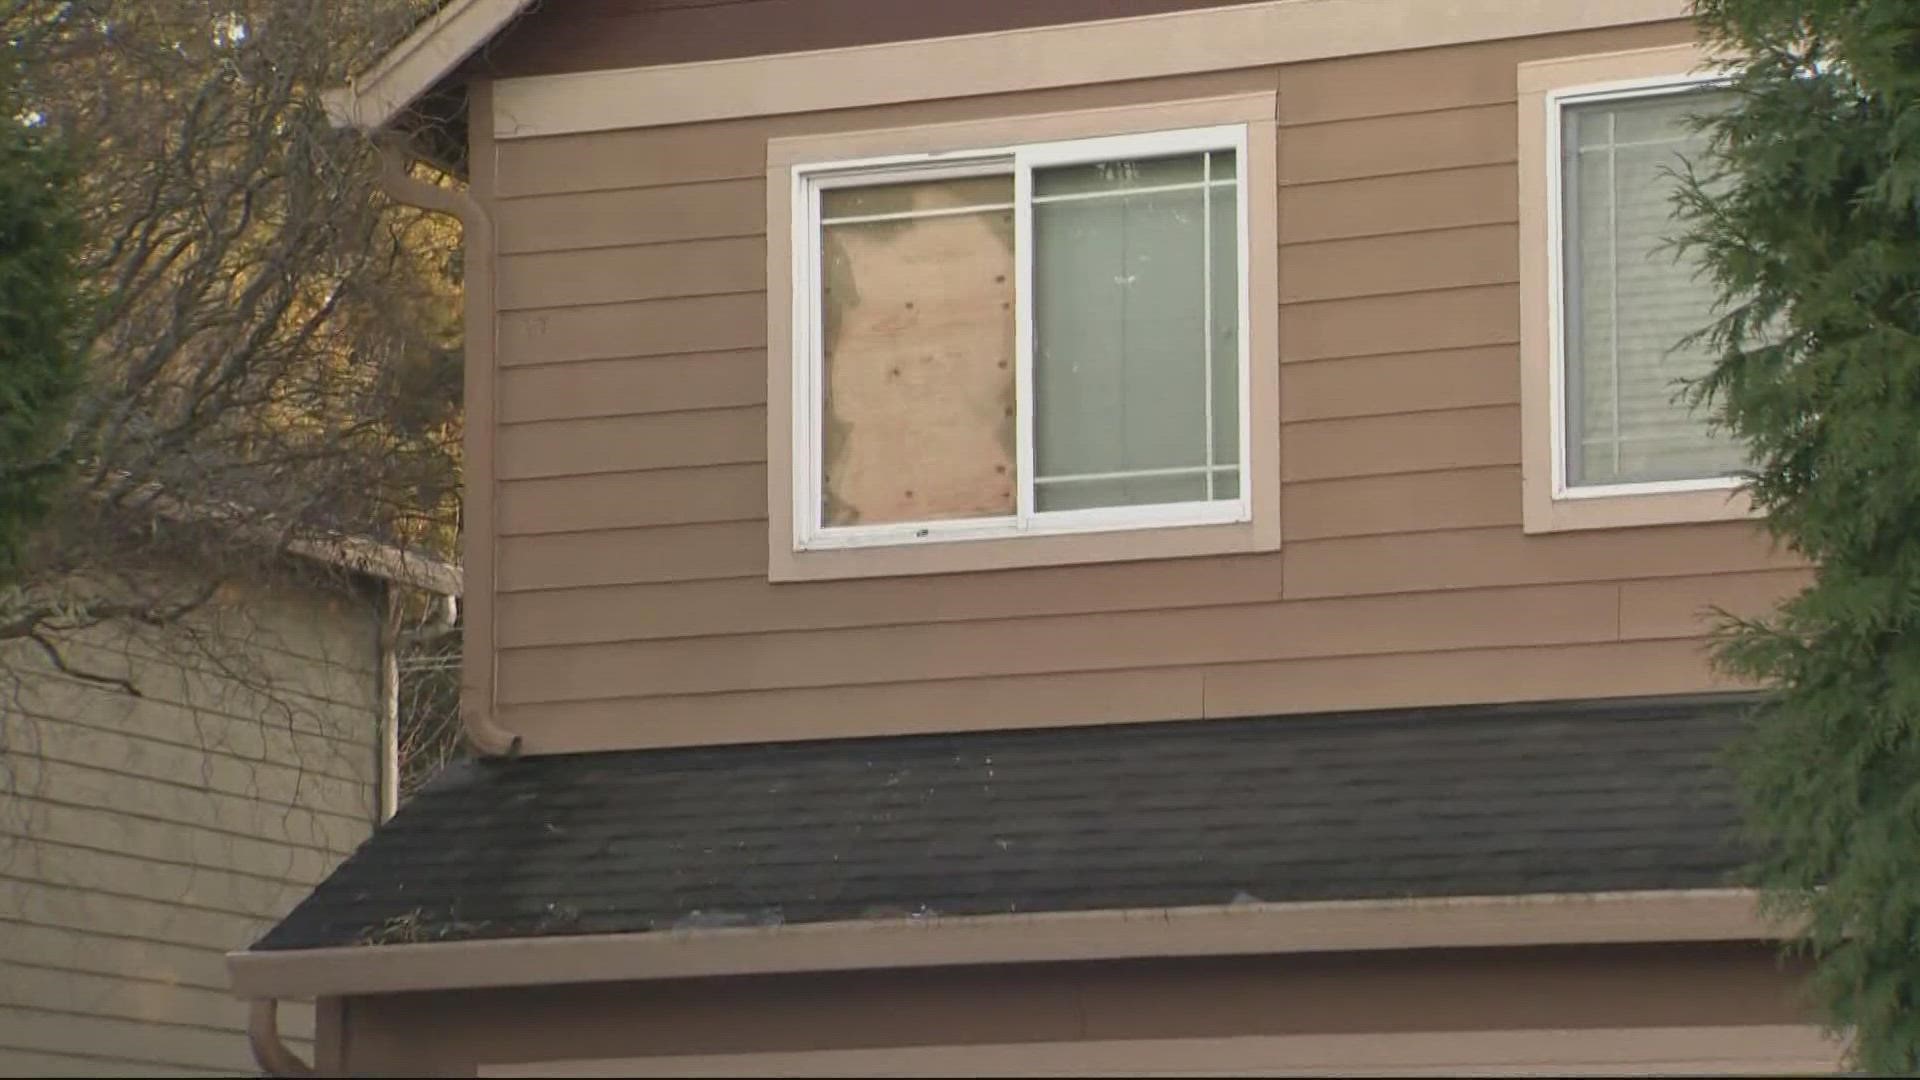 Vancouver police said they did not believe the burglar and homeowner knew one another prior to Thursday night's break-in.